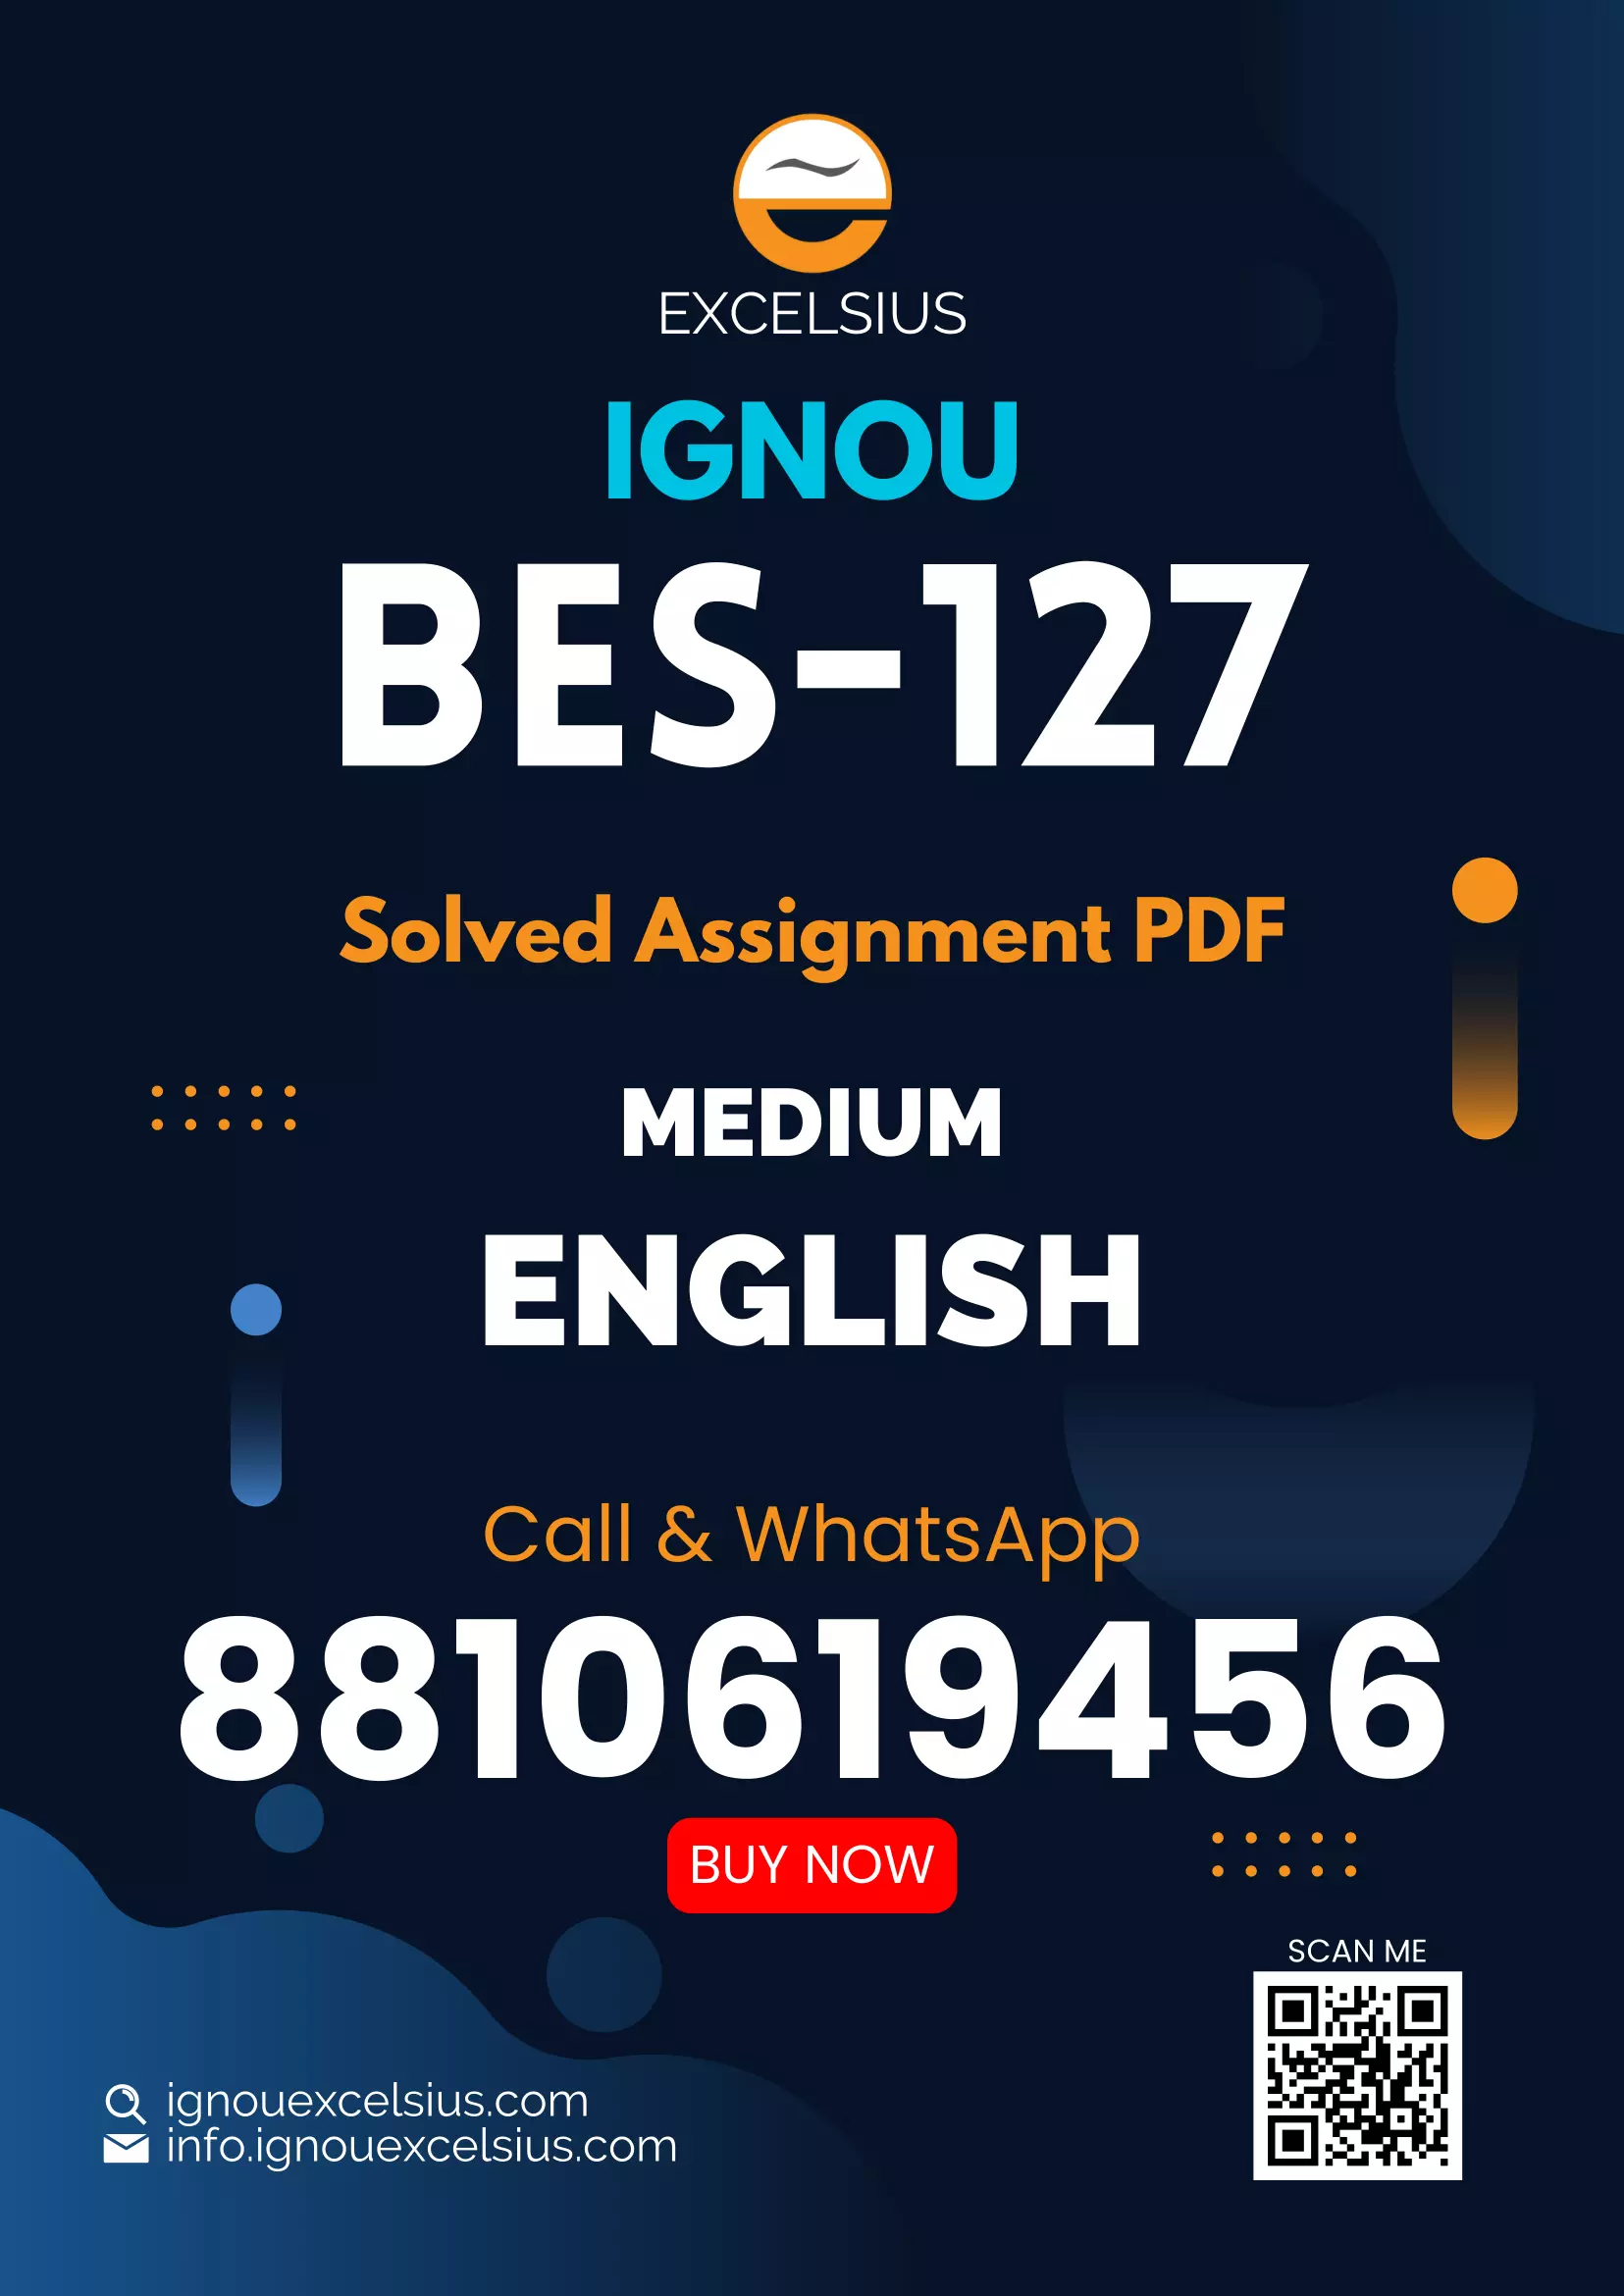 IGNOU BES-127 - Assessment for Learning, Latest Solved Assignment-January 2021 - July 2021